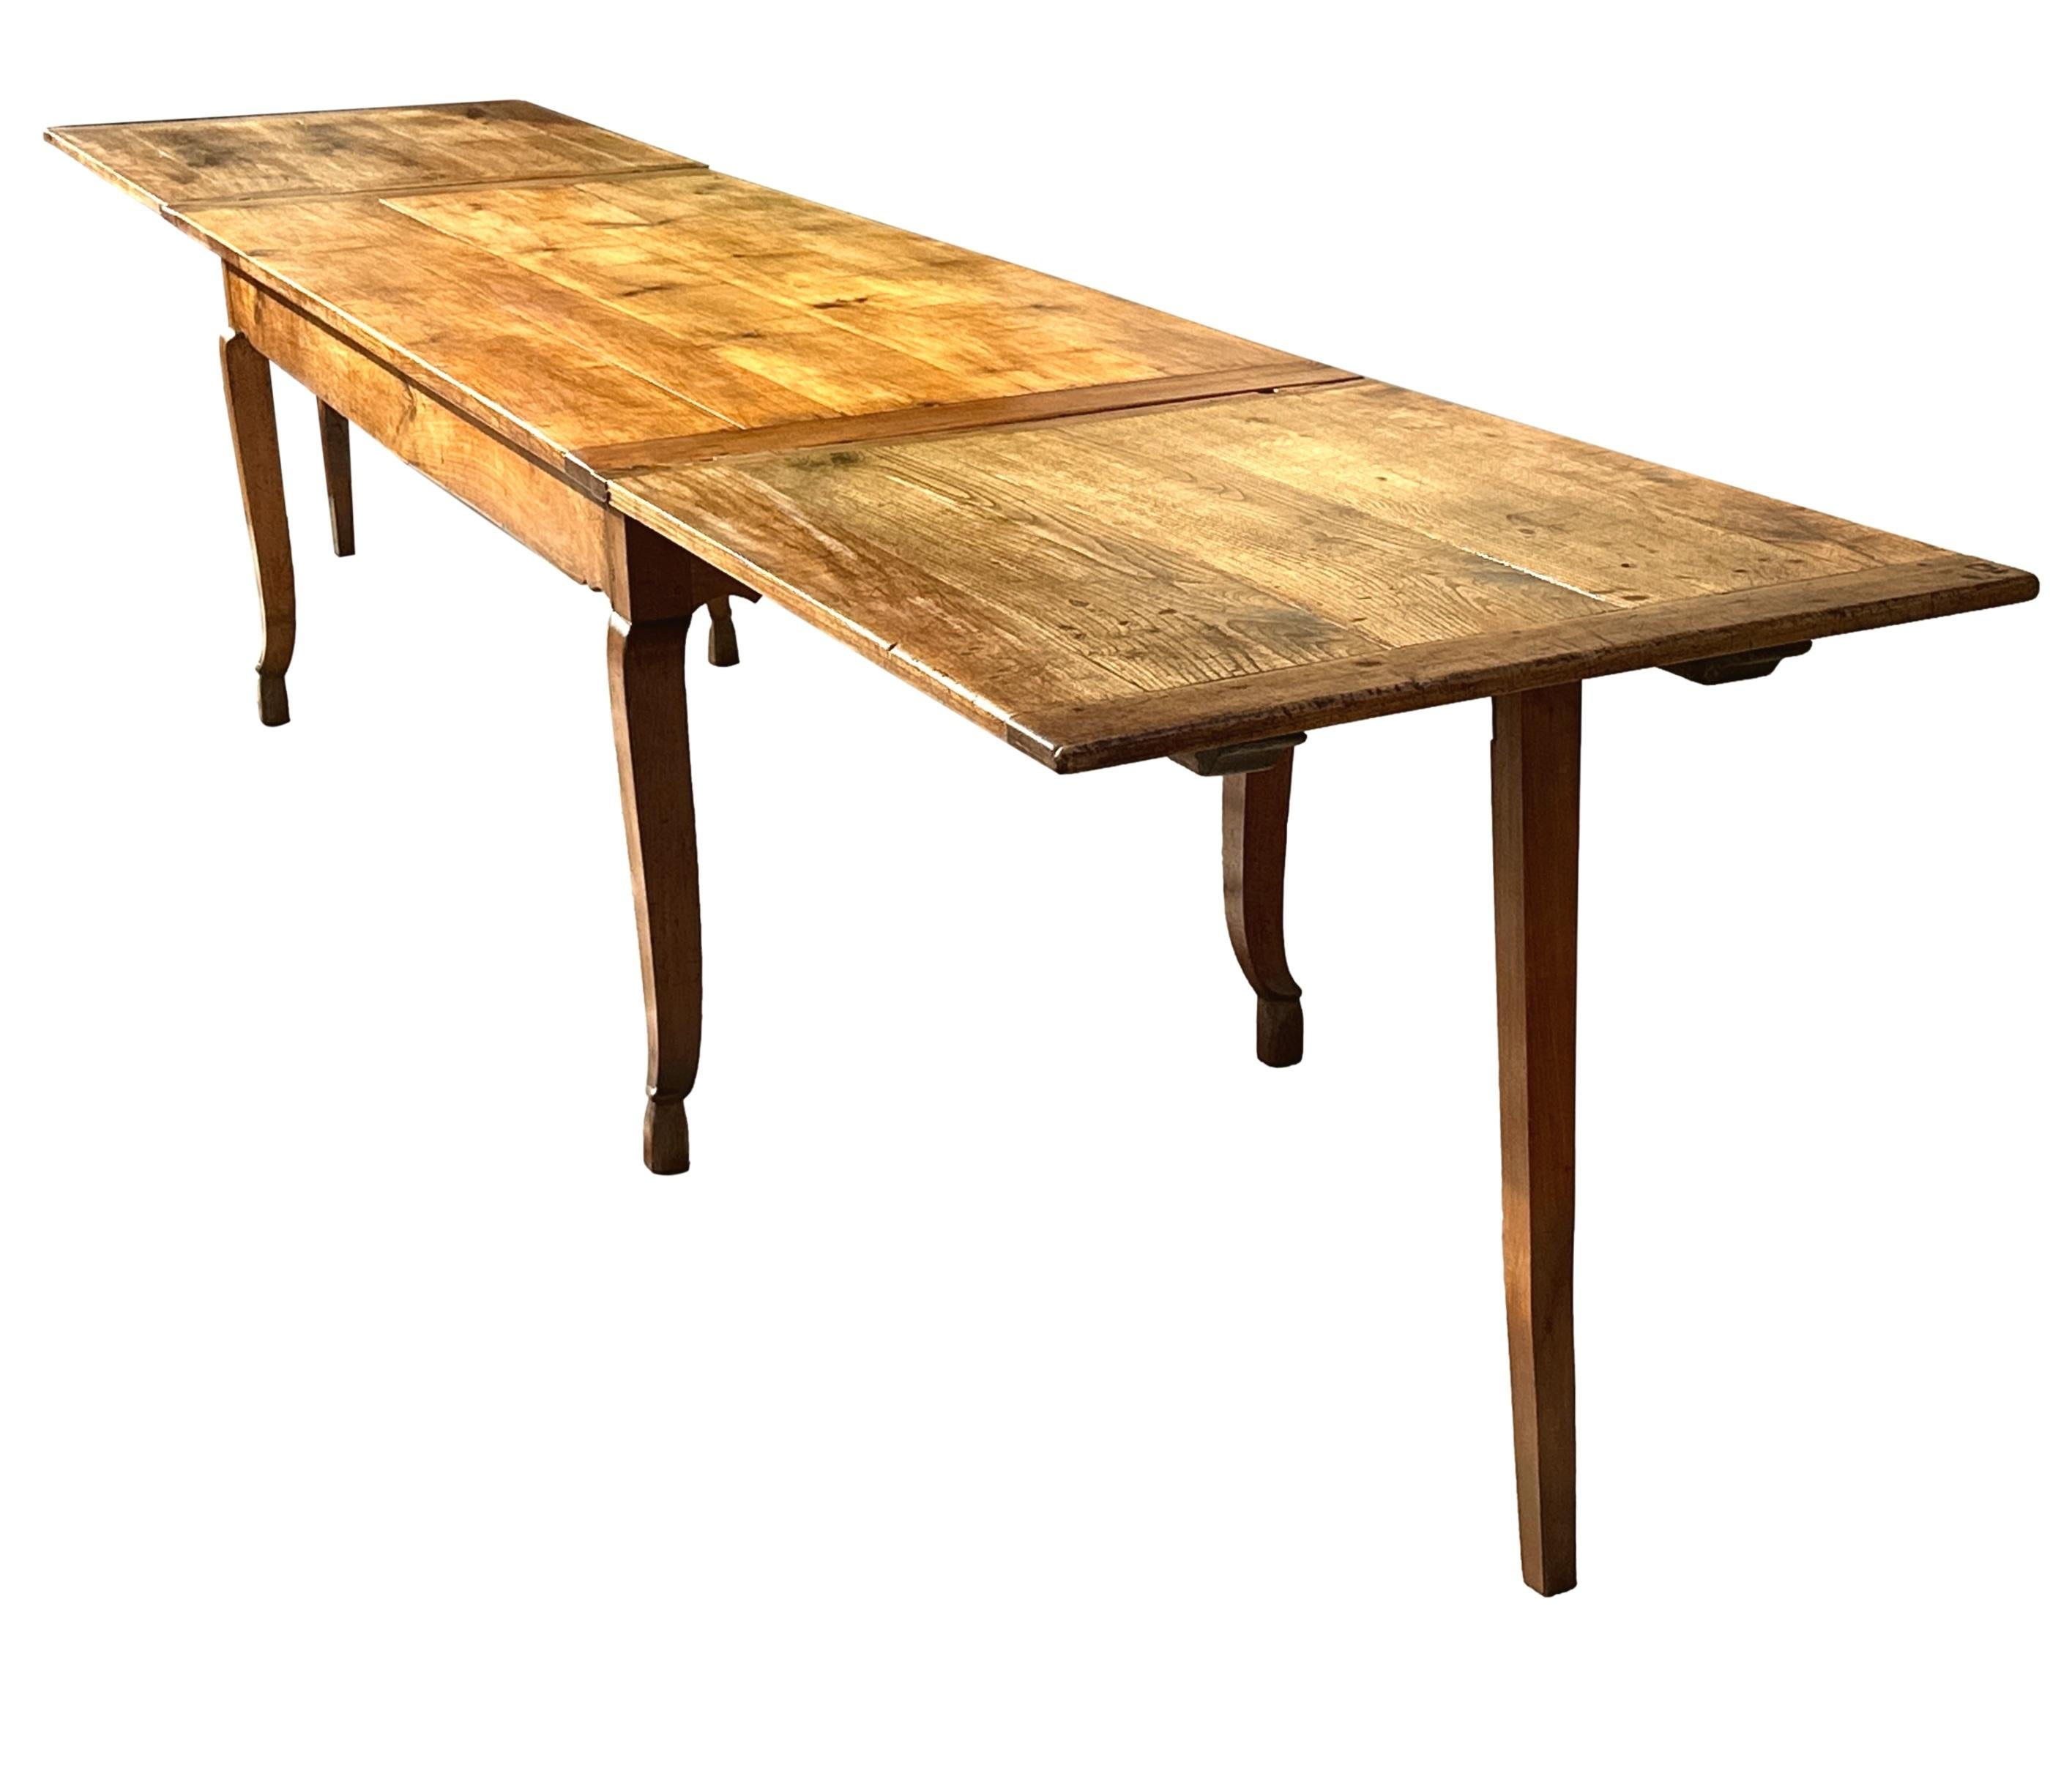 An Extremely Rare And Very Attractive, Good Quality, Early 19th Century French Cherry Wood & Chestnut Extending Farmhouse Kitchen Dining Table, The Well Figured Rectangular Top With Double Drawleaf Ends To Comfortably Seat 16 People, Raised Above